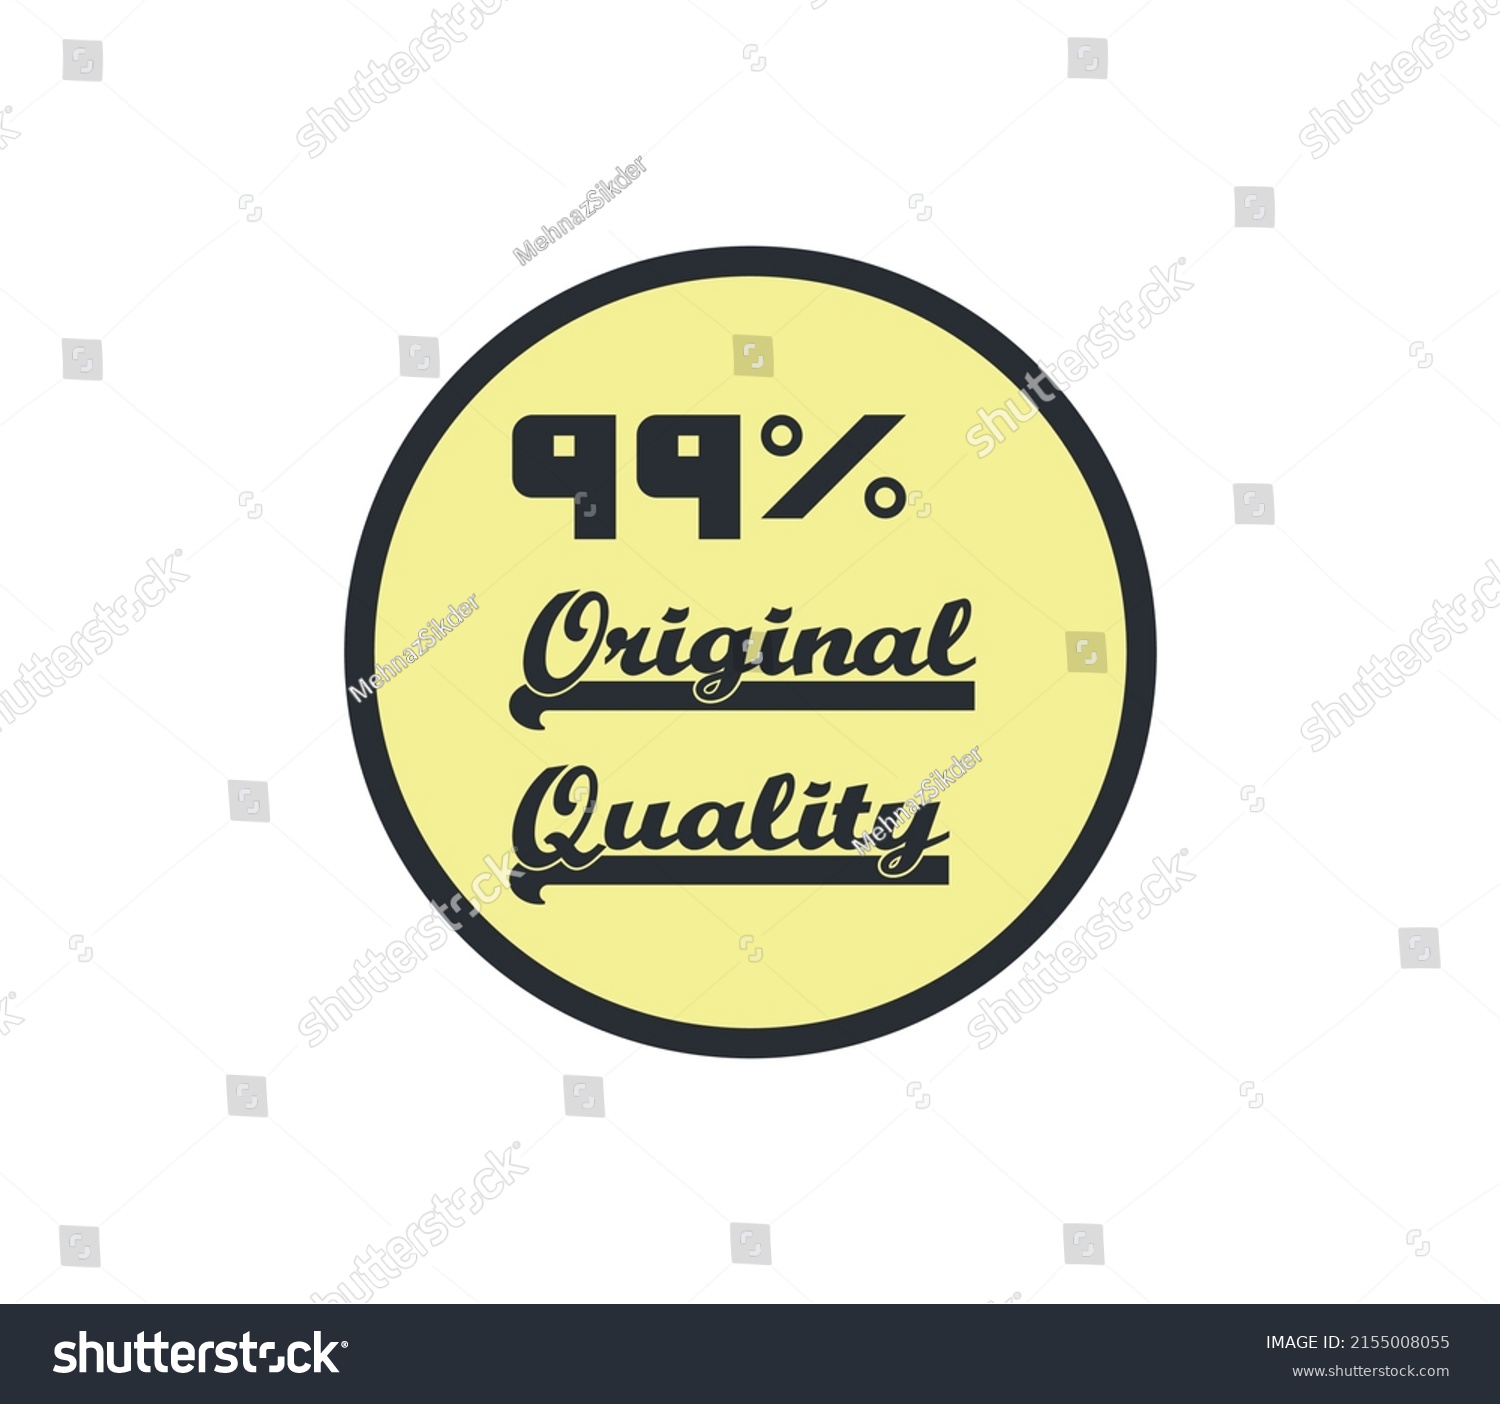 99% percentage original quality circular sign label vector art illustration with fantastic font and yellow background #2155008055